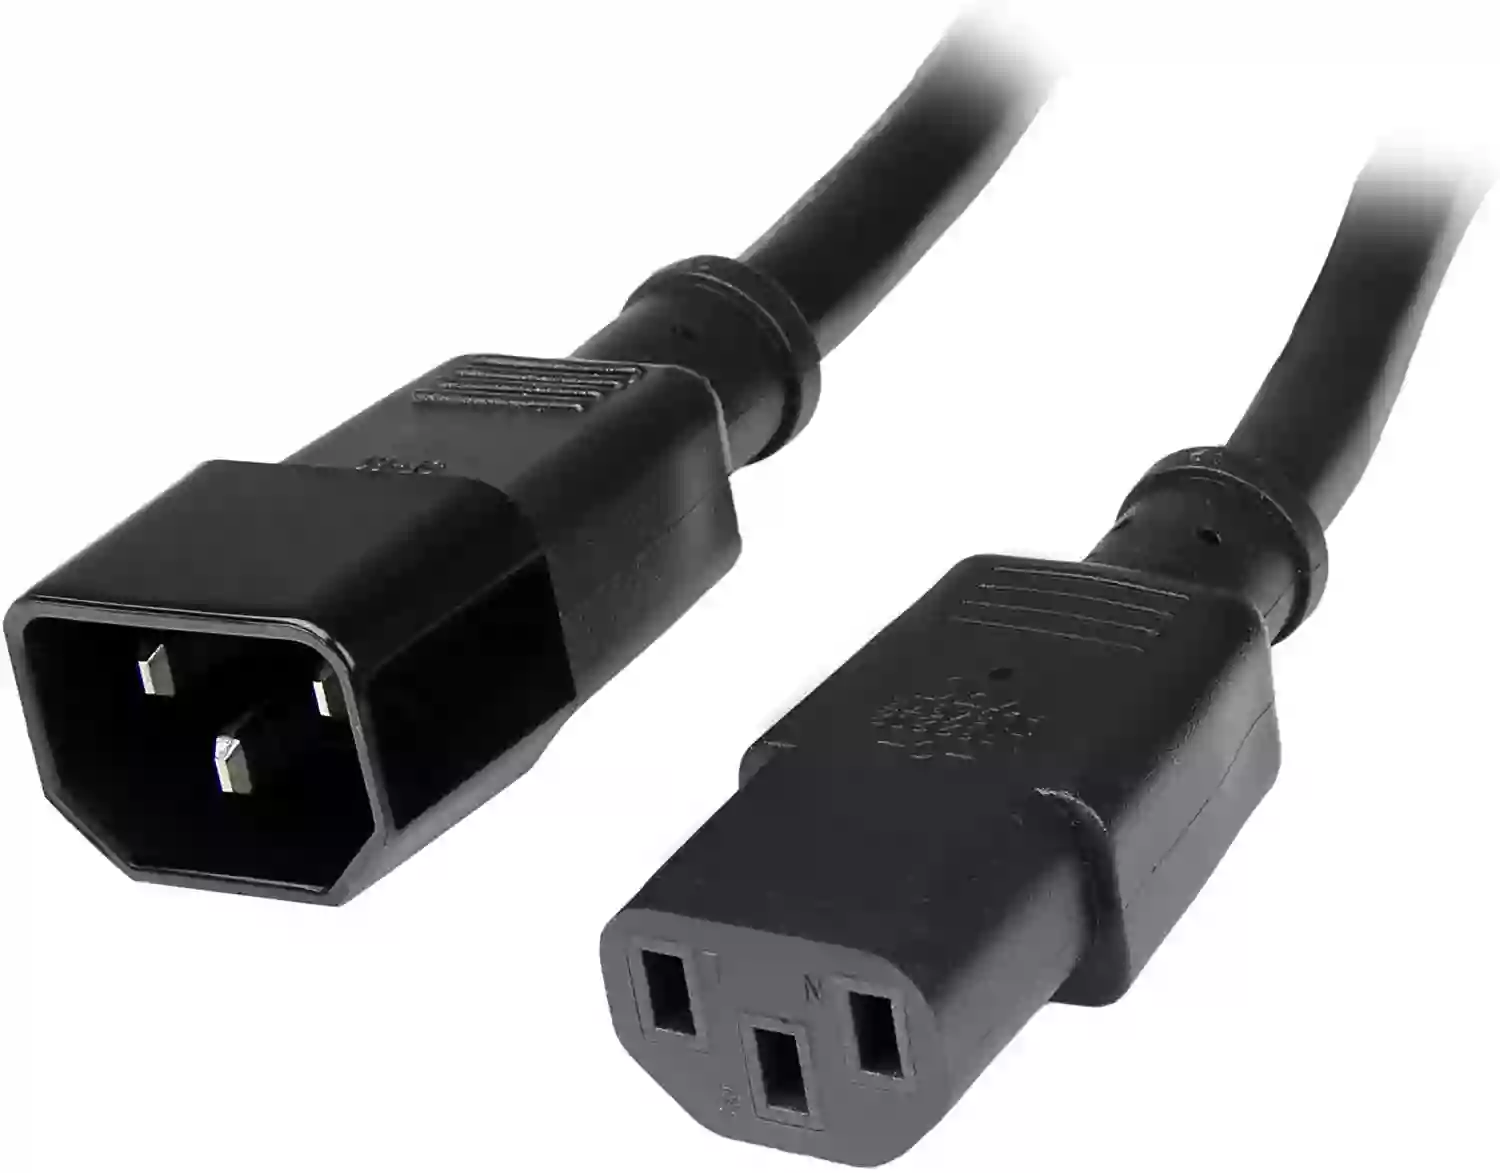 Standard Computer Power Cord Extension { back to back UPS cable c13 to c14 }